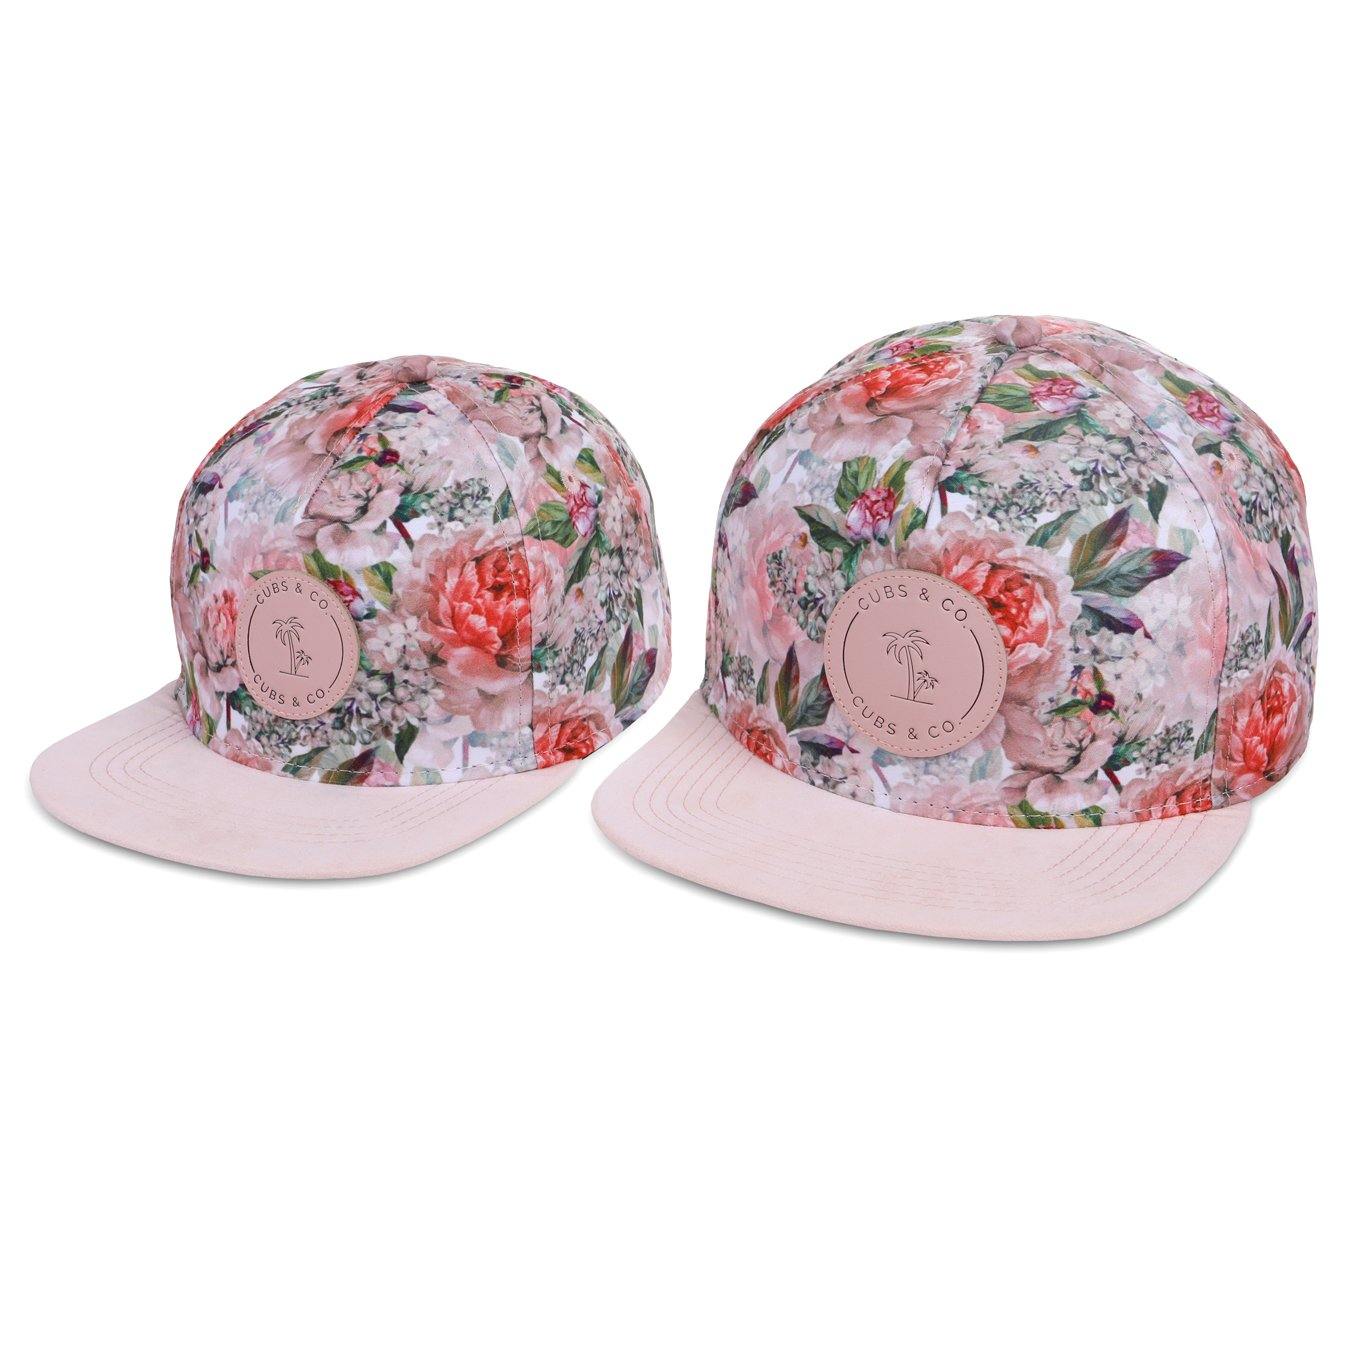 Matching Kids and women's pink floral snapback hat. Cubs & Co. Australia.